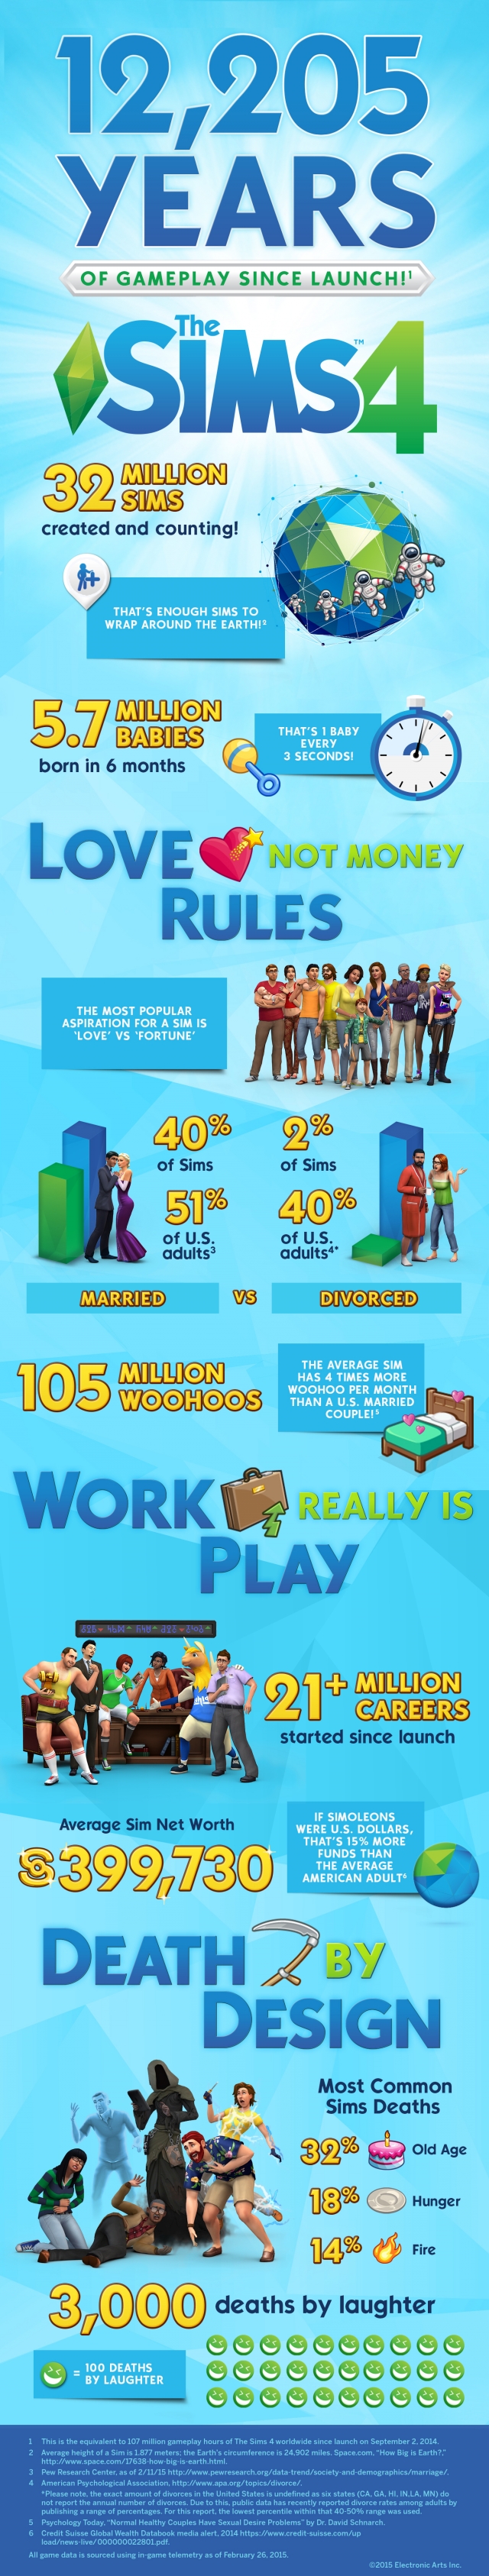 sims 4 infographic